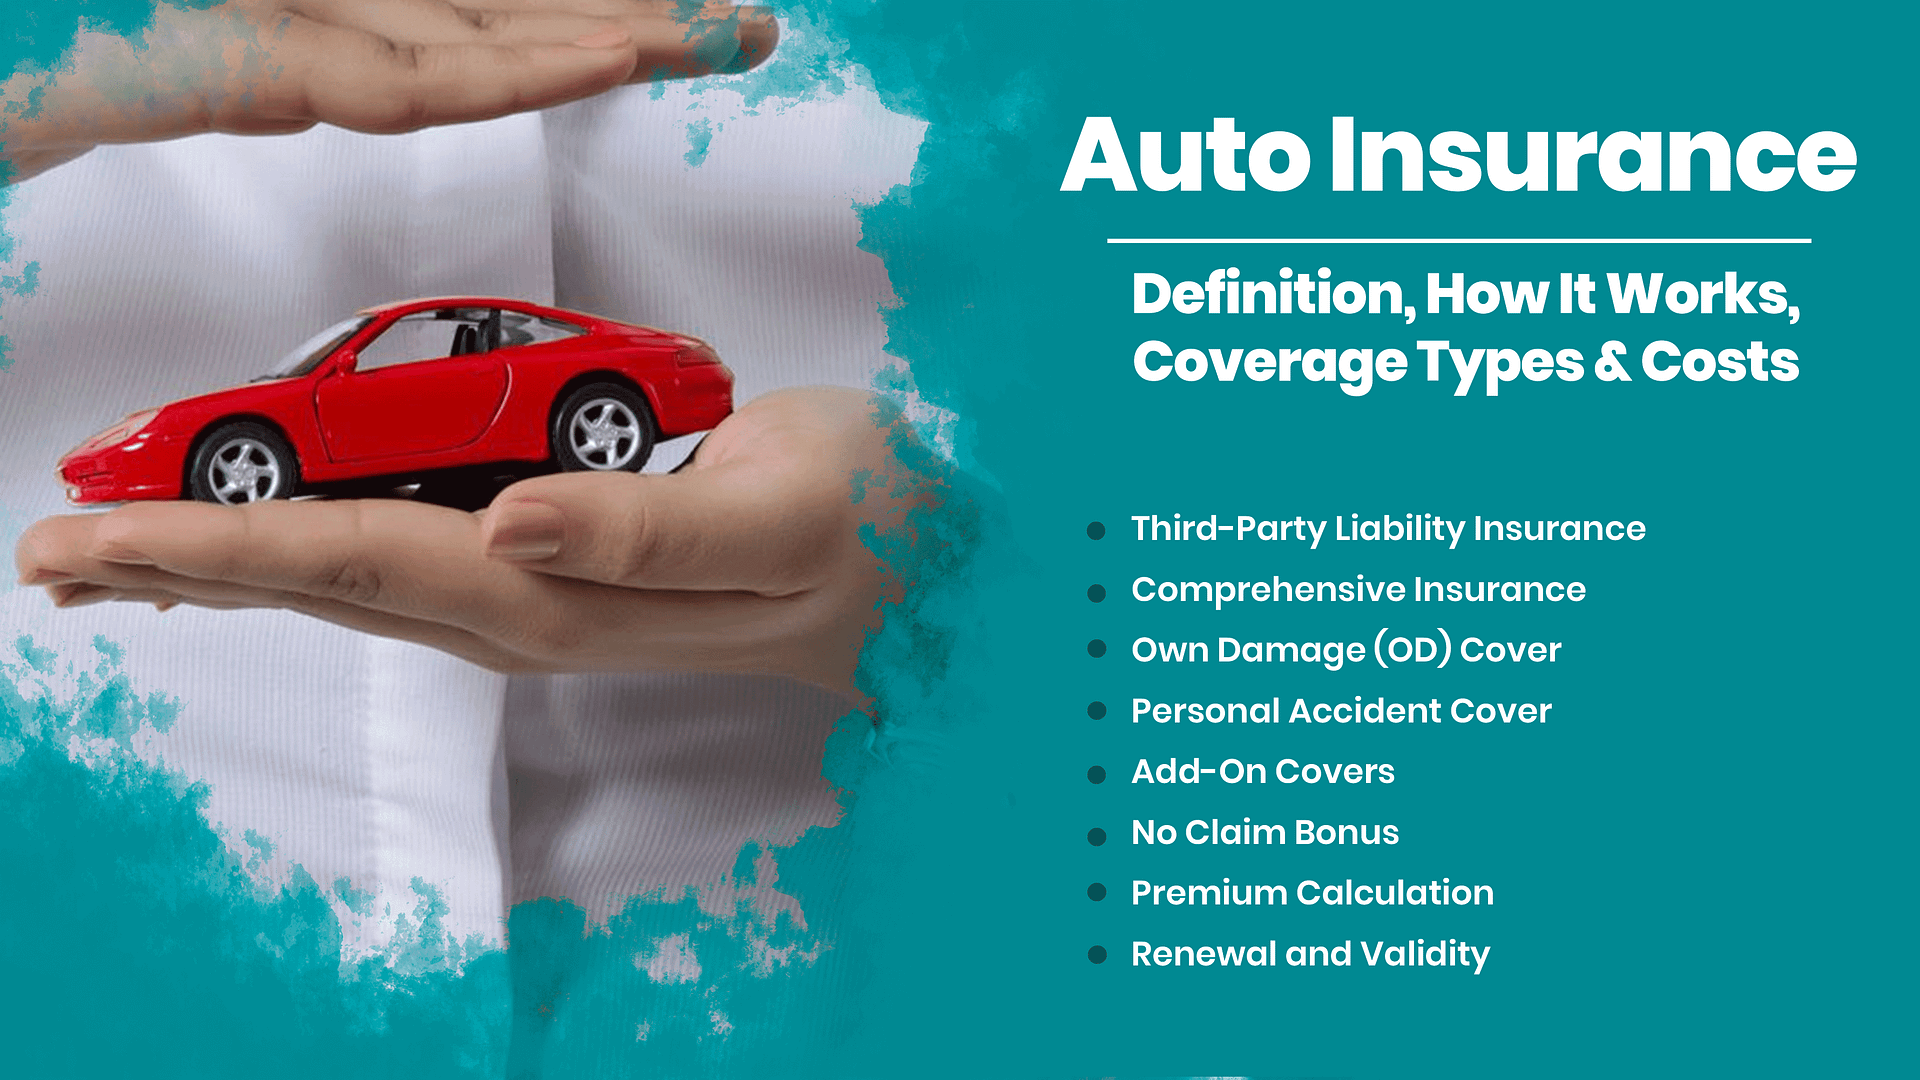 Auto Insurance : Definition, How It Works, Coverage Types & Costs